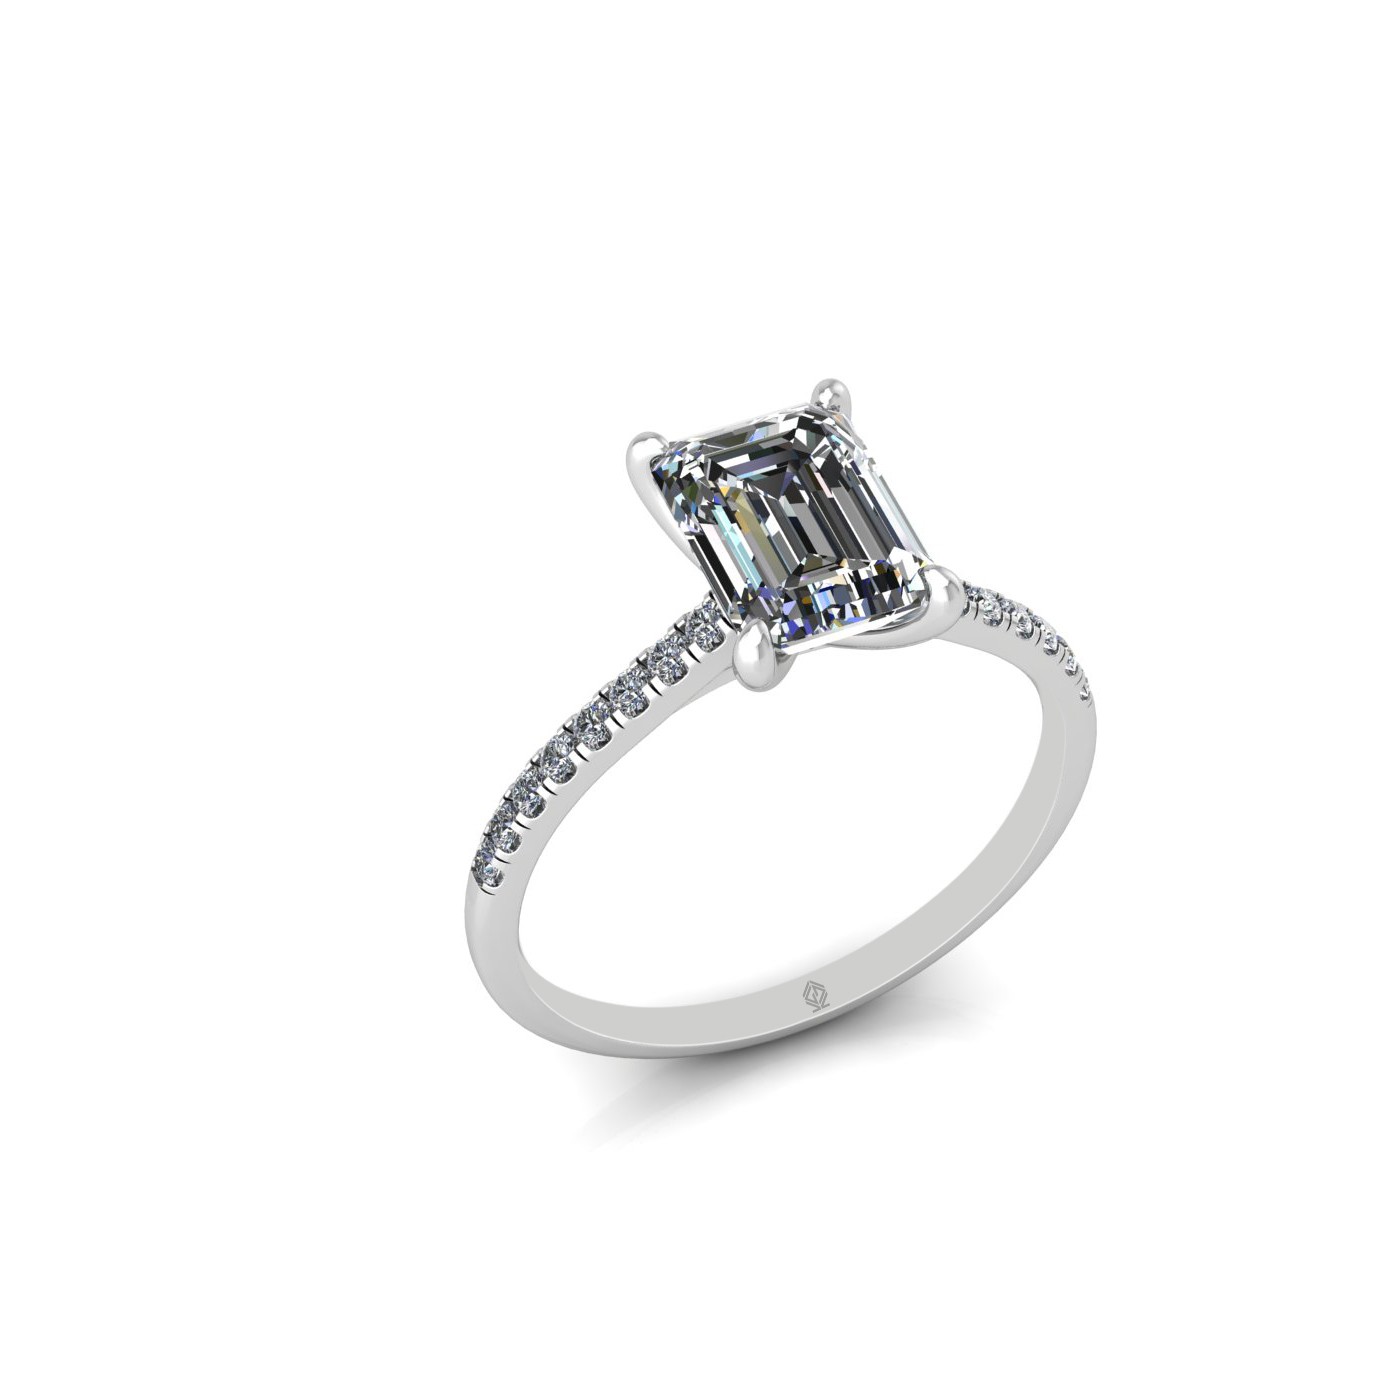 18k white gold 1.5ct 4 prongs emerald cut diamond engagement ring with whisper thin pavÉ set band